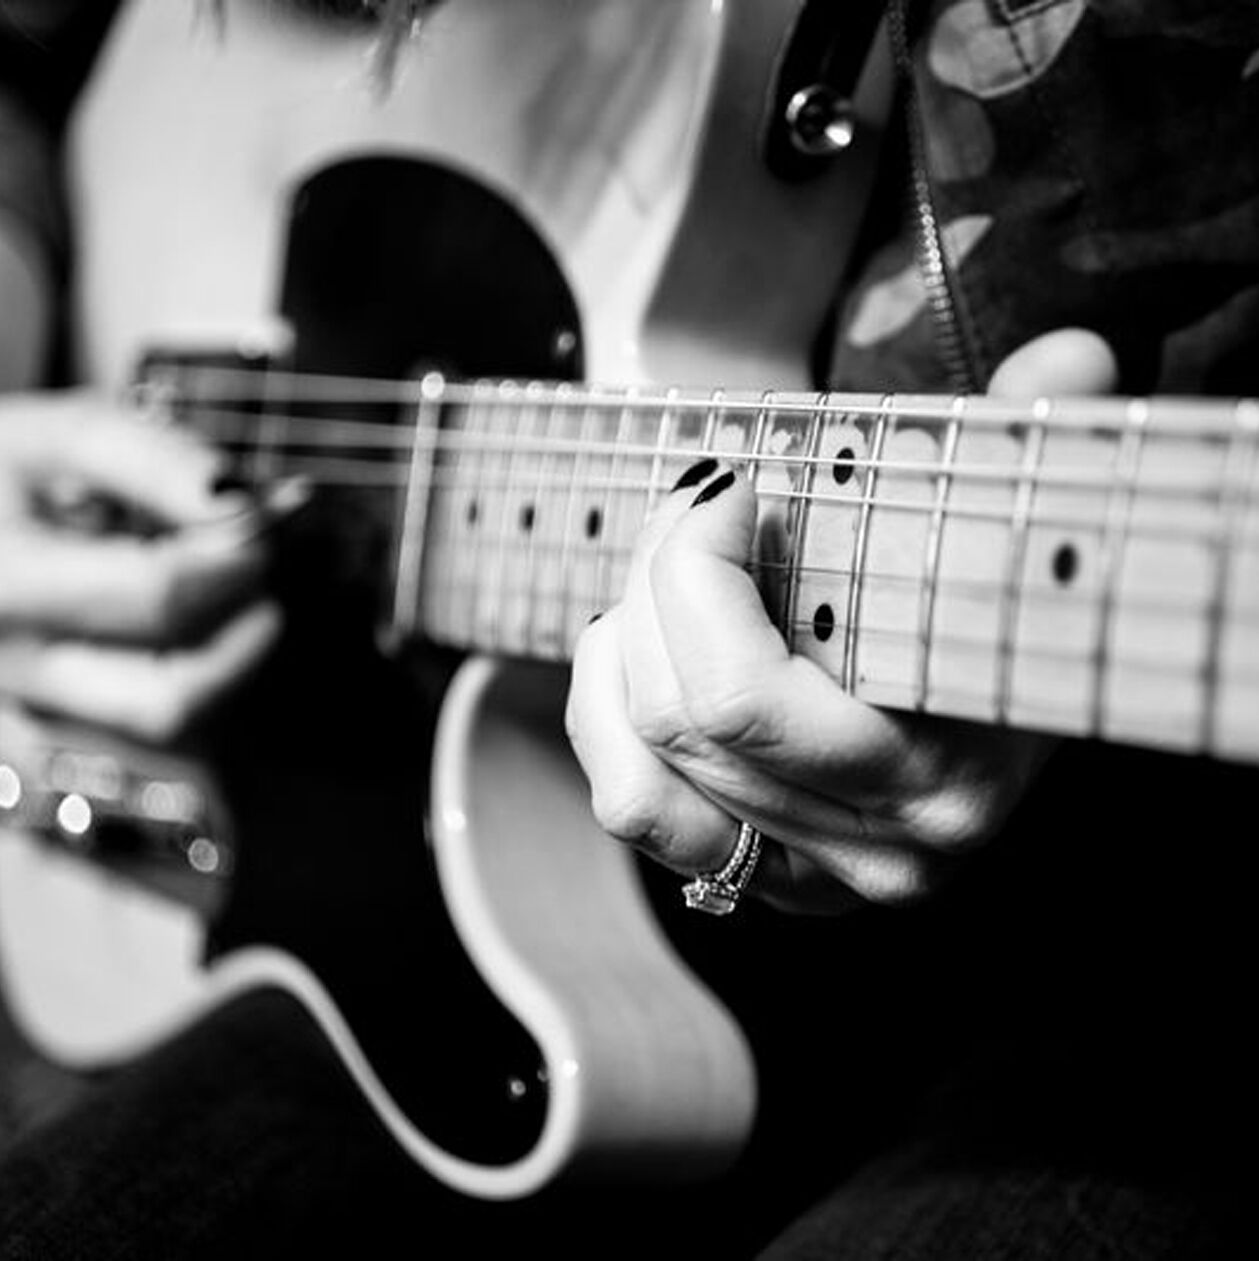 black and white photo of a person playing an electric guitar